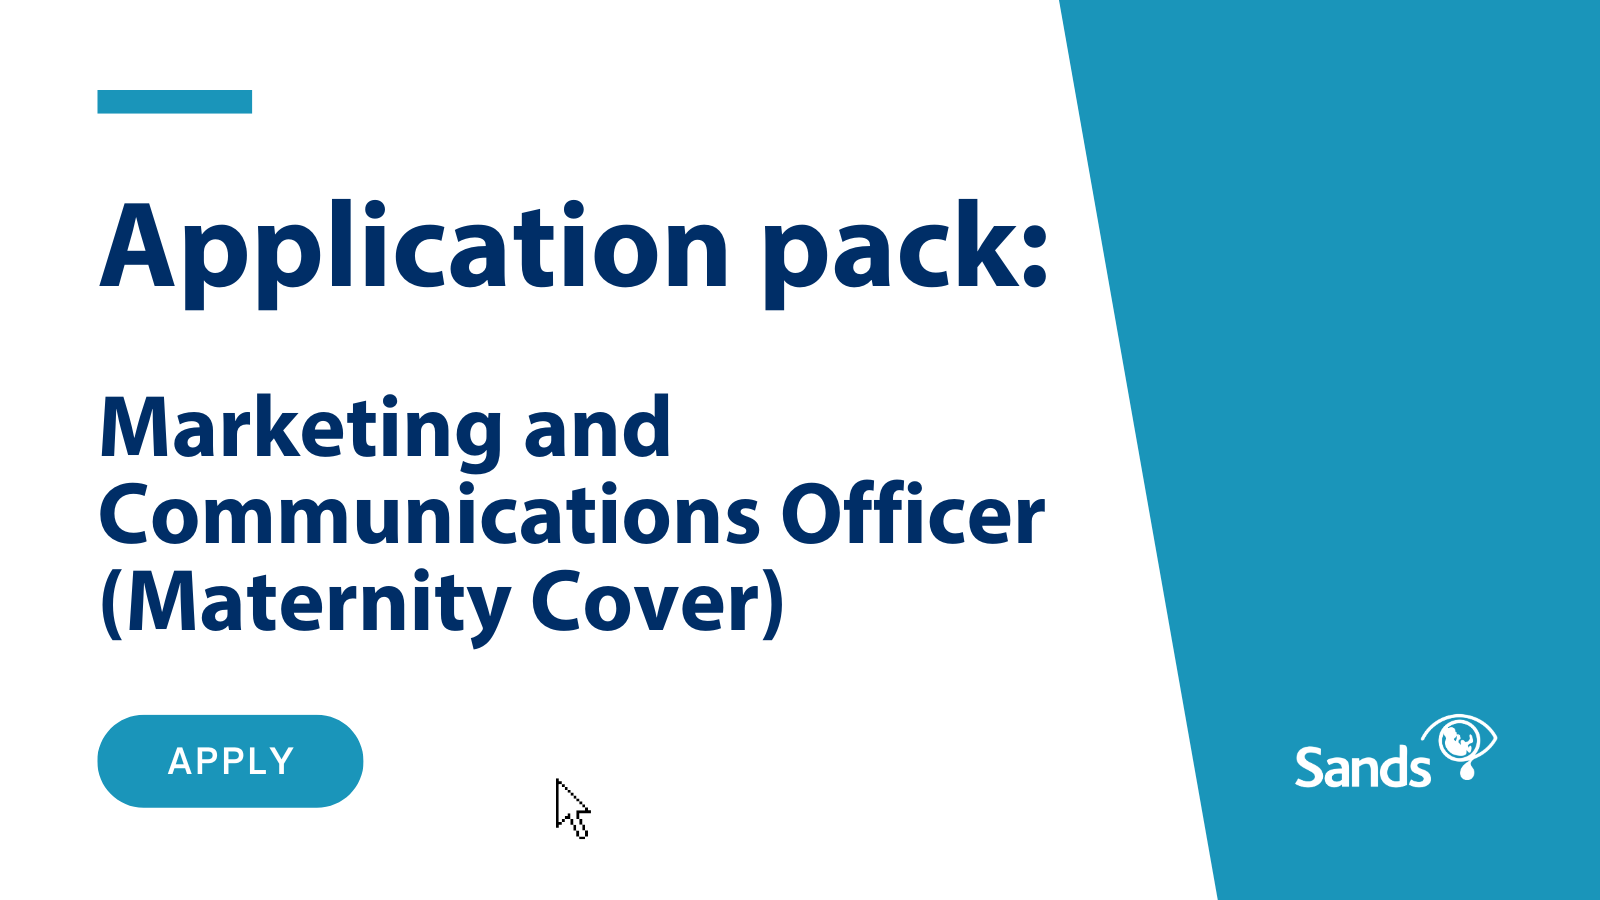 Application Pack Marketing and Communications Officer Maternity Cover